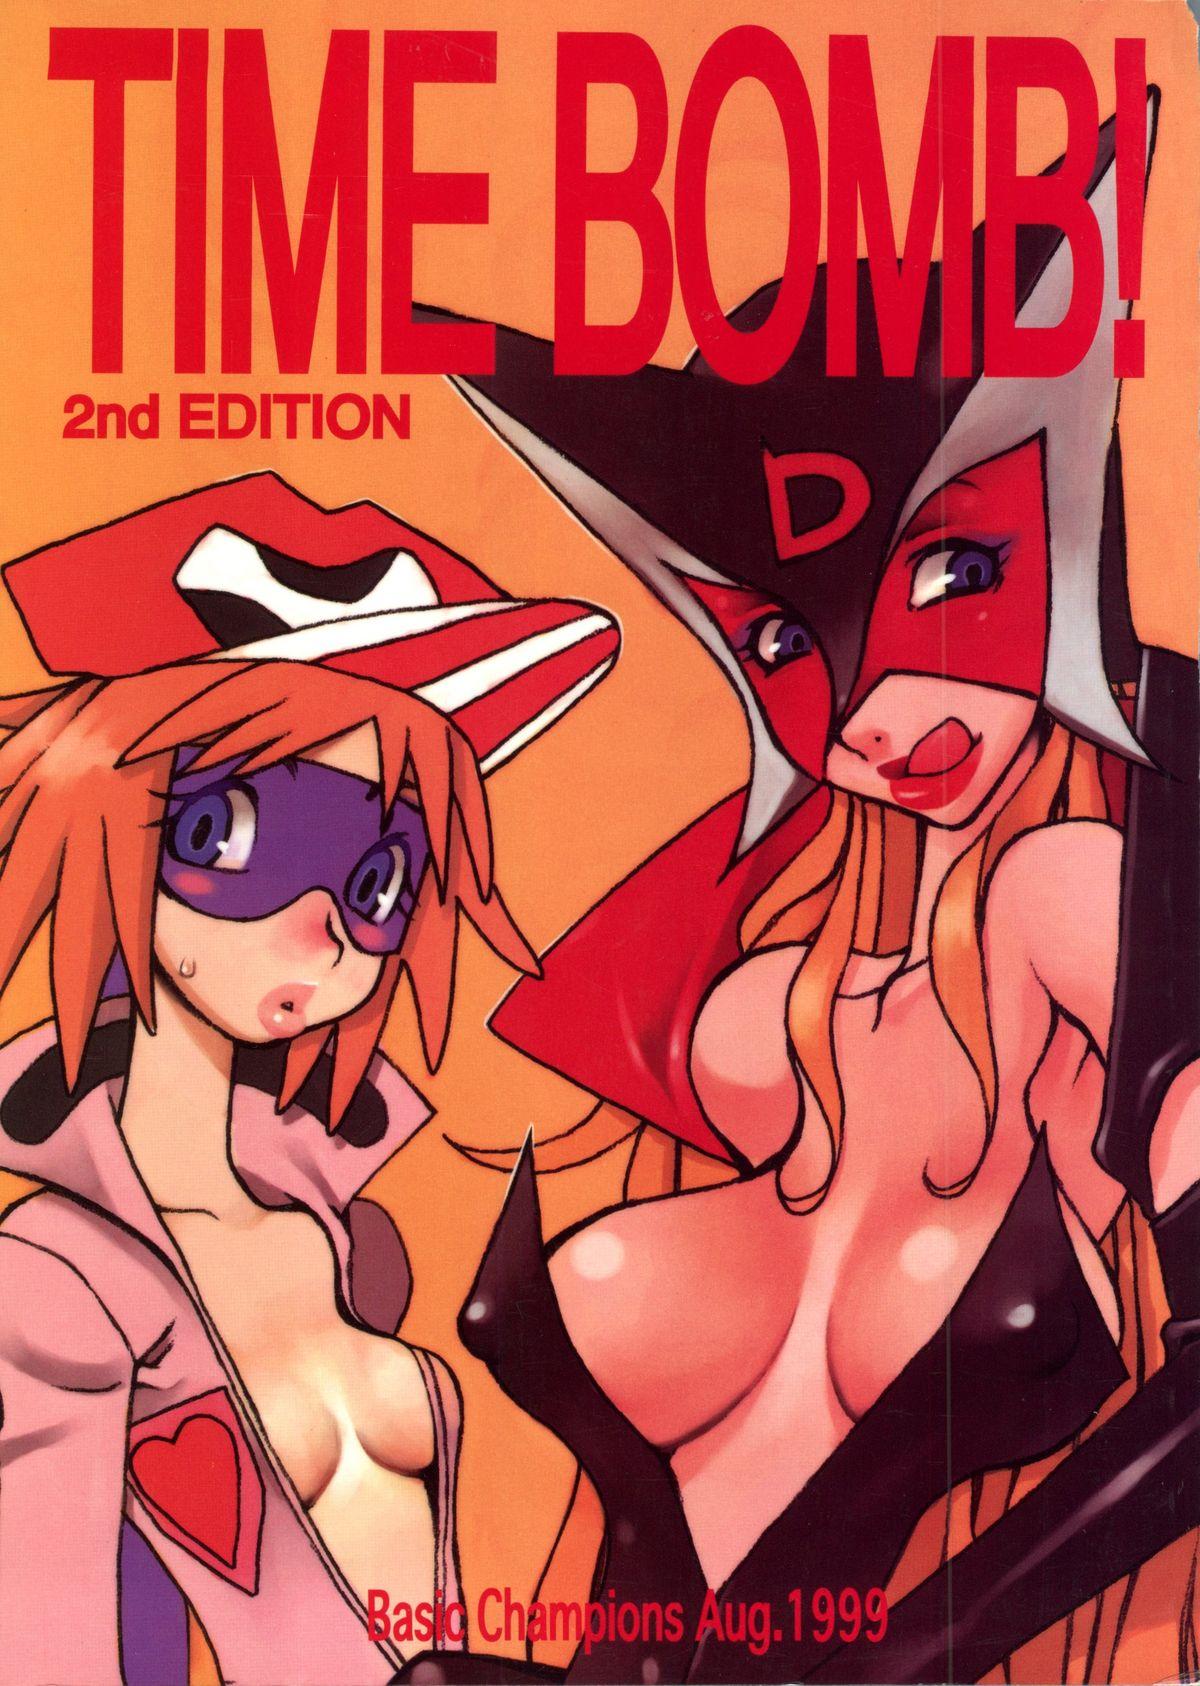 TIME BOMB! 2nd Edition 0